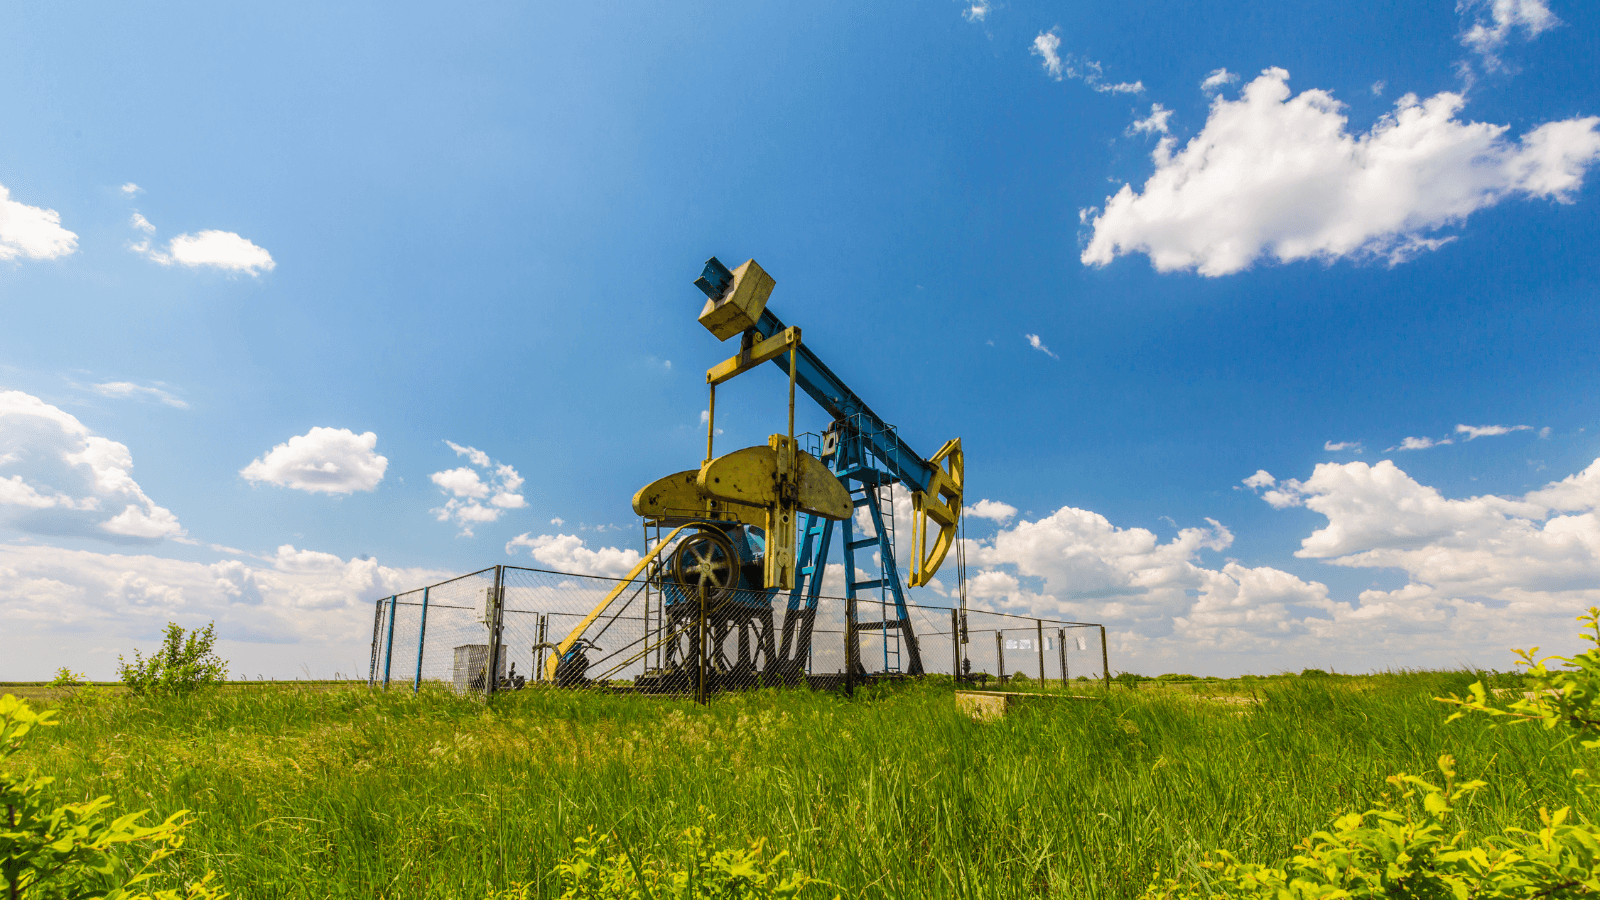 An oil drill on green grass with a blue sky 